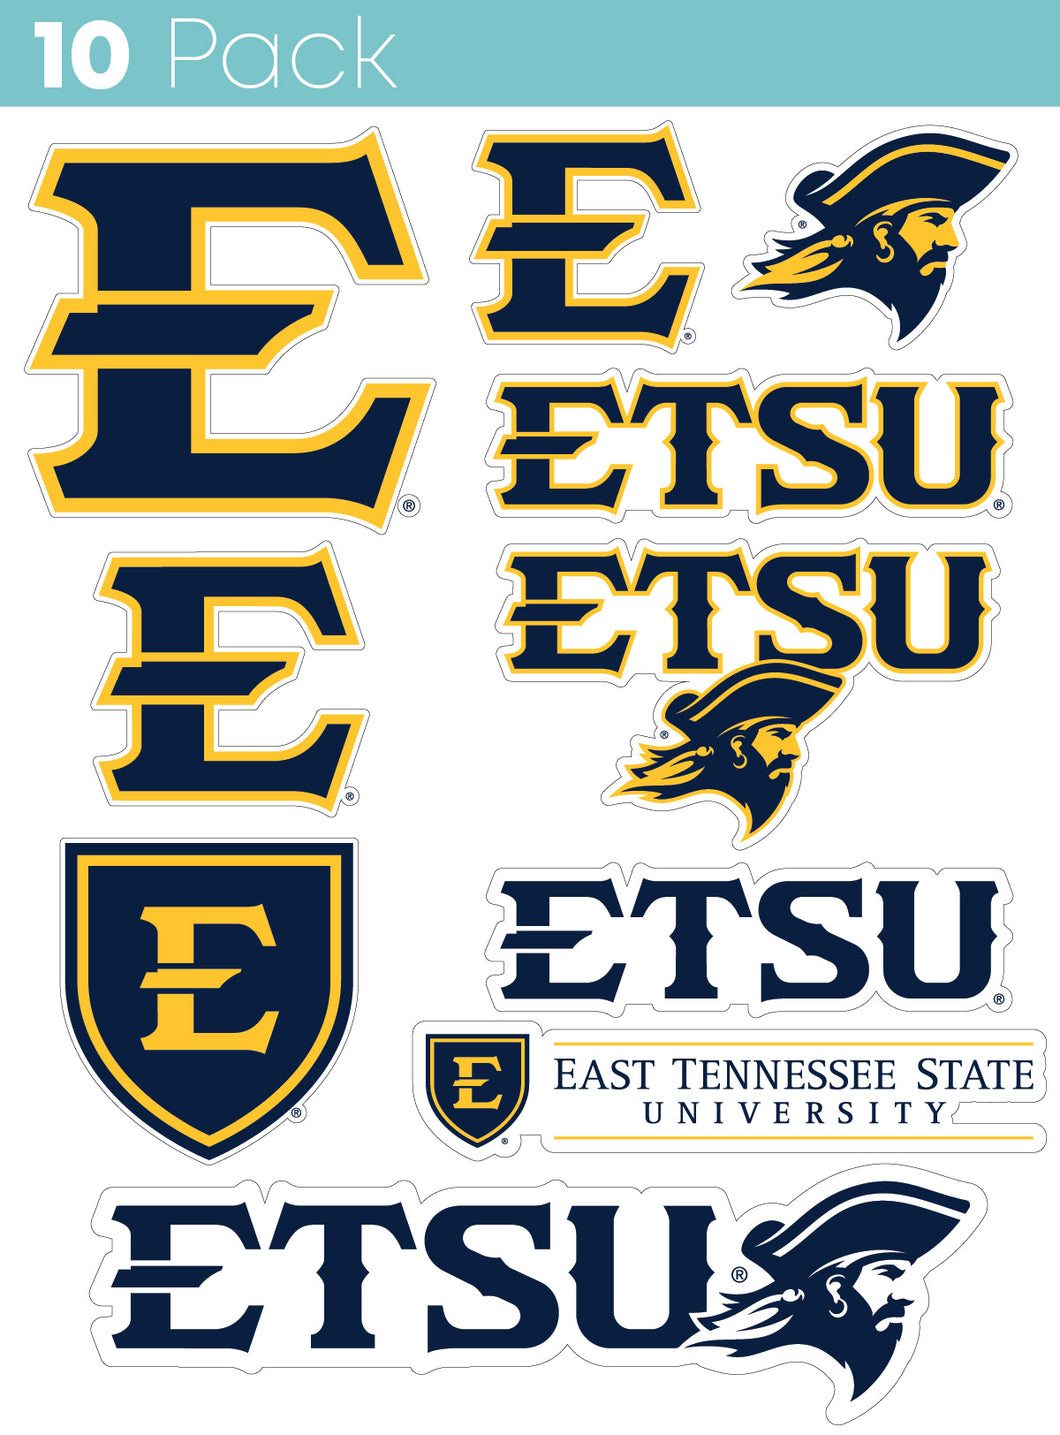 East Tennessee State University 10 Pack Collegiate Vinyl Decal Sticker 